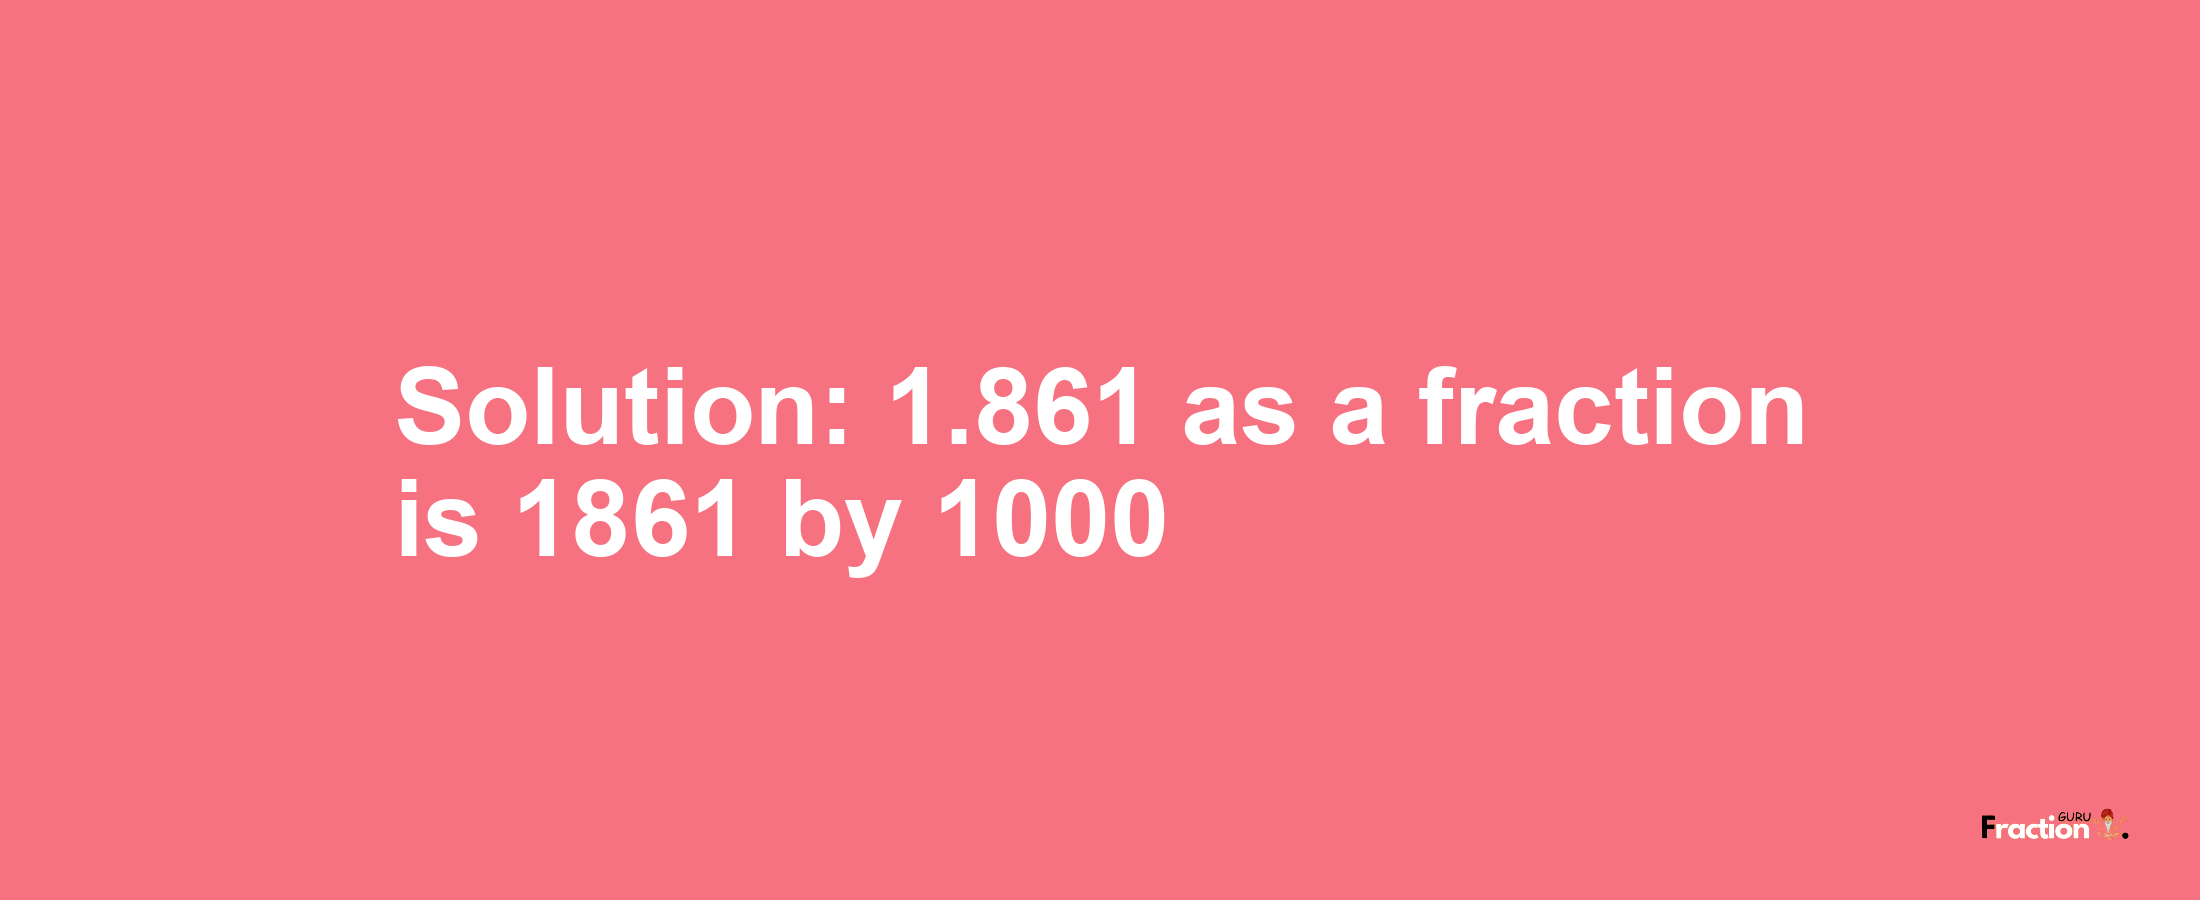 Solution:1.861 as a fraction is 1861/1000